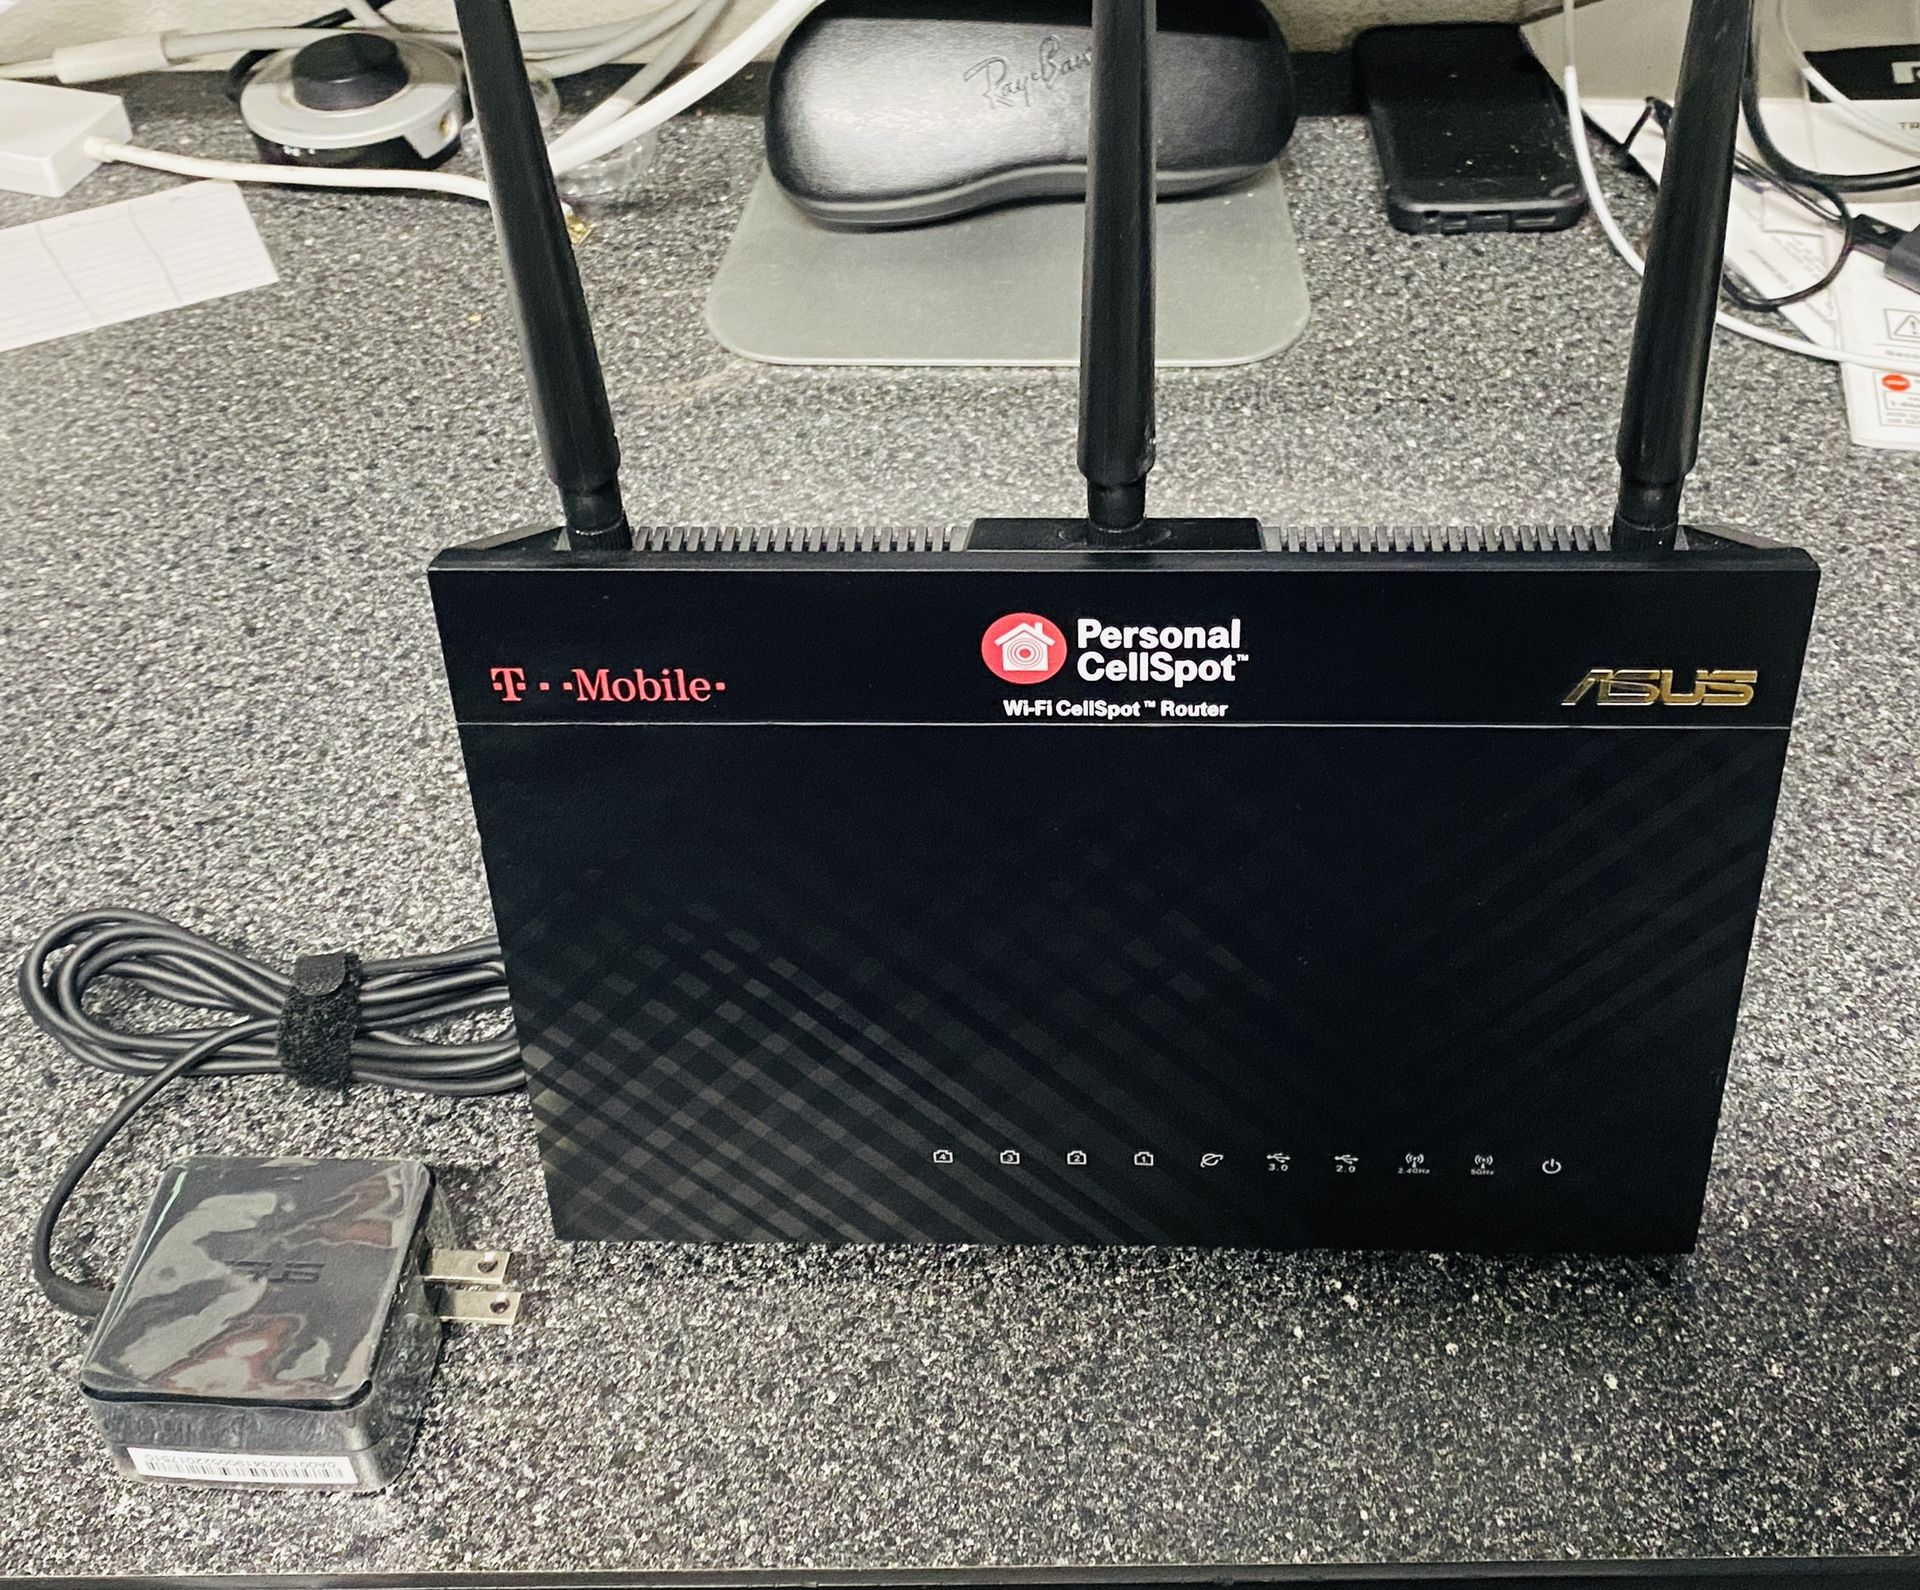 Asus AC1900, T-Mobile CellSpot, router WiFi and cell phone dead spots